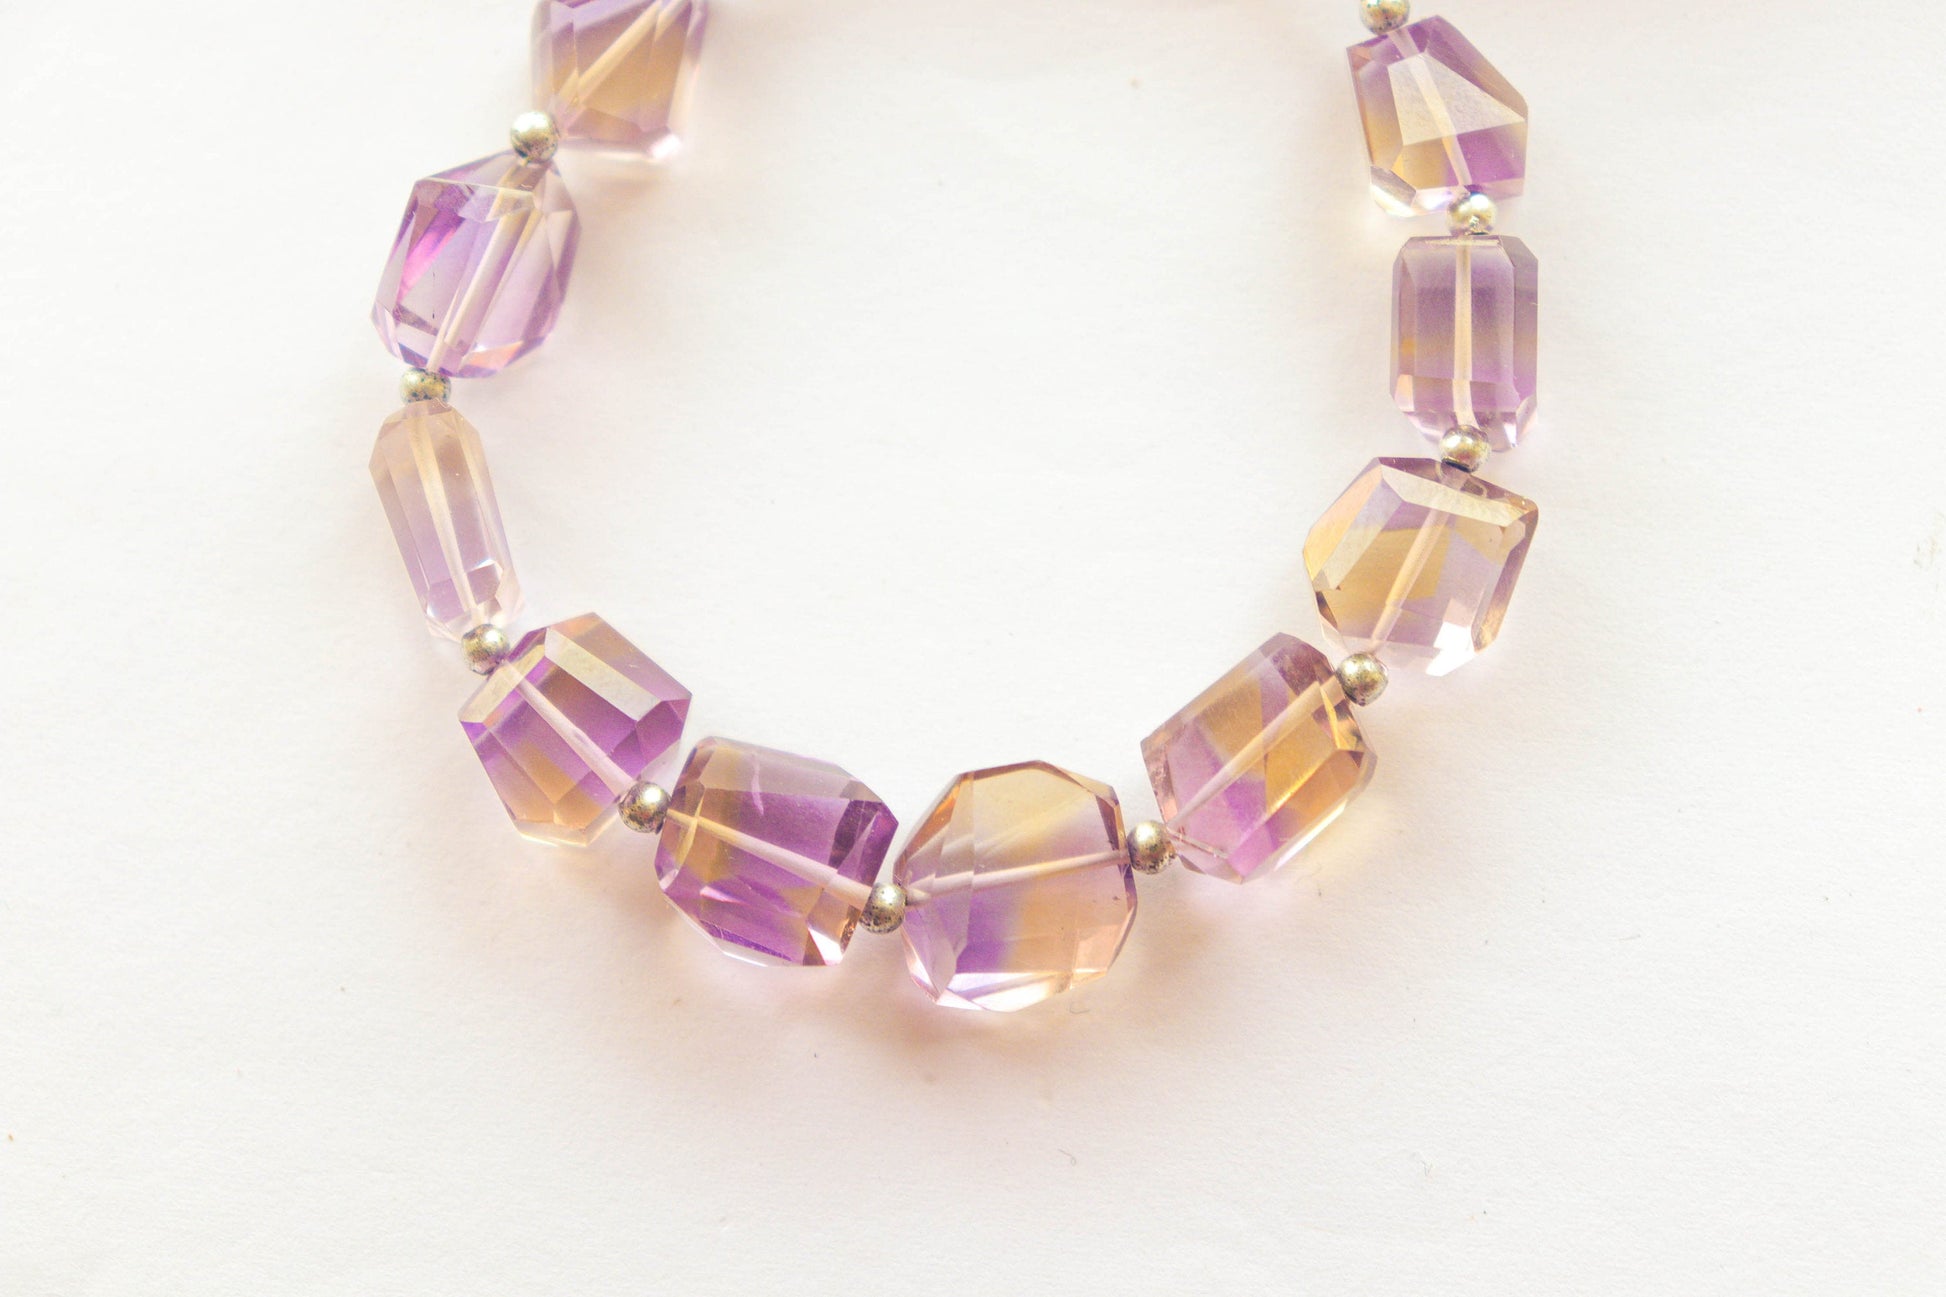 Ametrine Beads Uneven Shape Faceted Tumbles | 8x10mm-10x12mm | 10 Pieces | 5 inch | High Quality Ametrine Gemstone | Beadsforyourjewellery | BFYJ1123 Beadsforyourjewelry